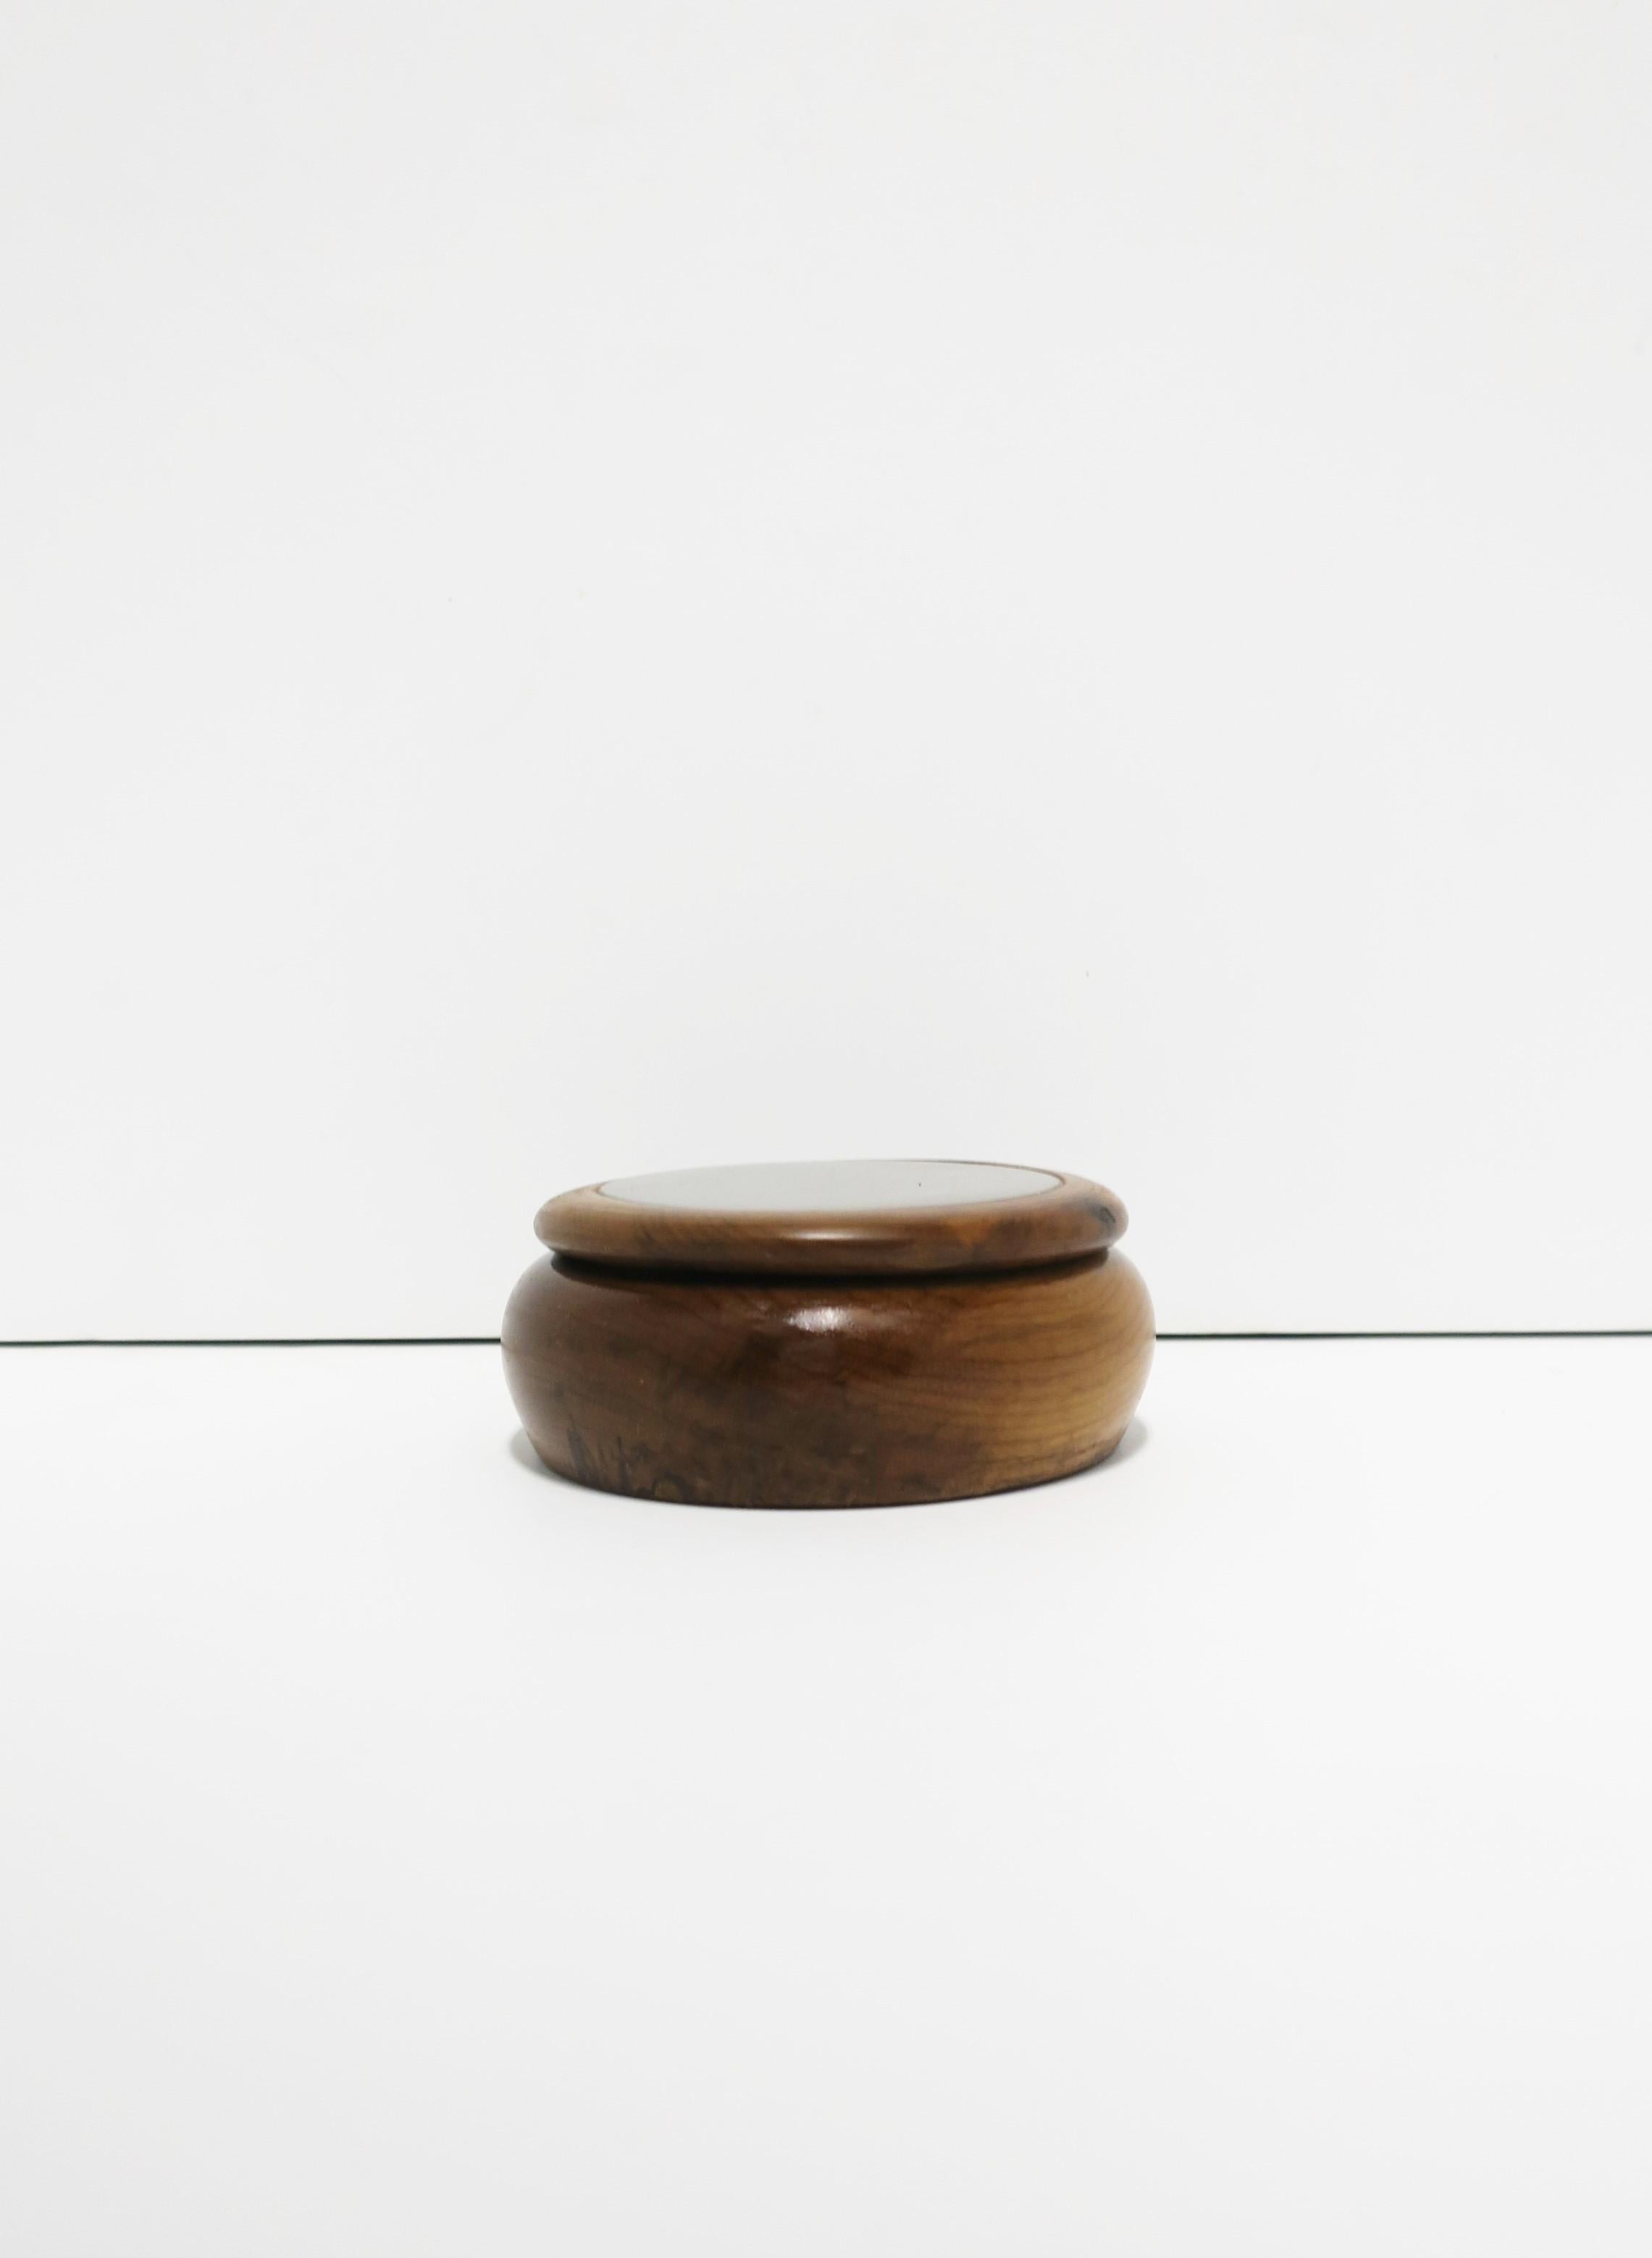 Post-Modern Brazilian Agate Onyx and Wood Round Jewelry or Trinket Box, Brazil, 1980s For Sale